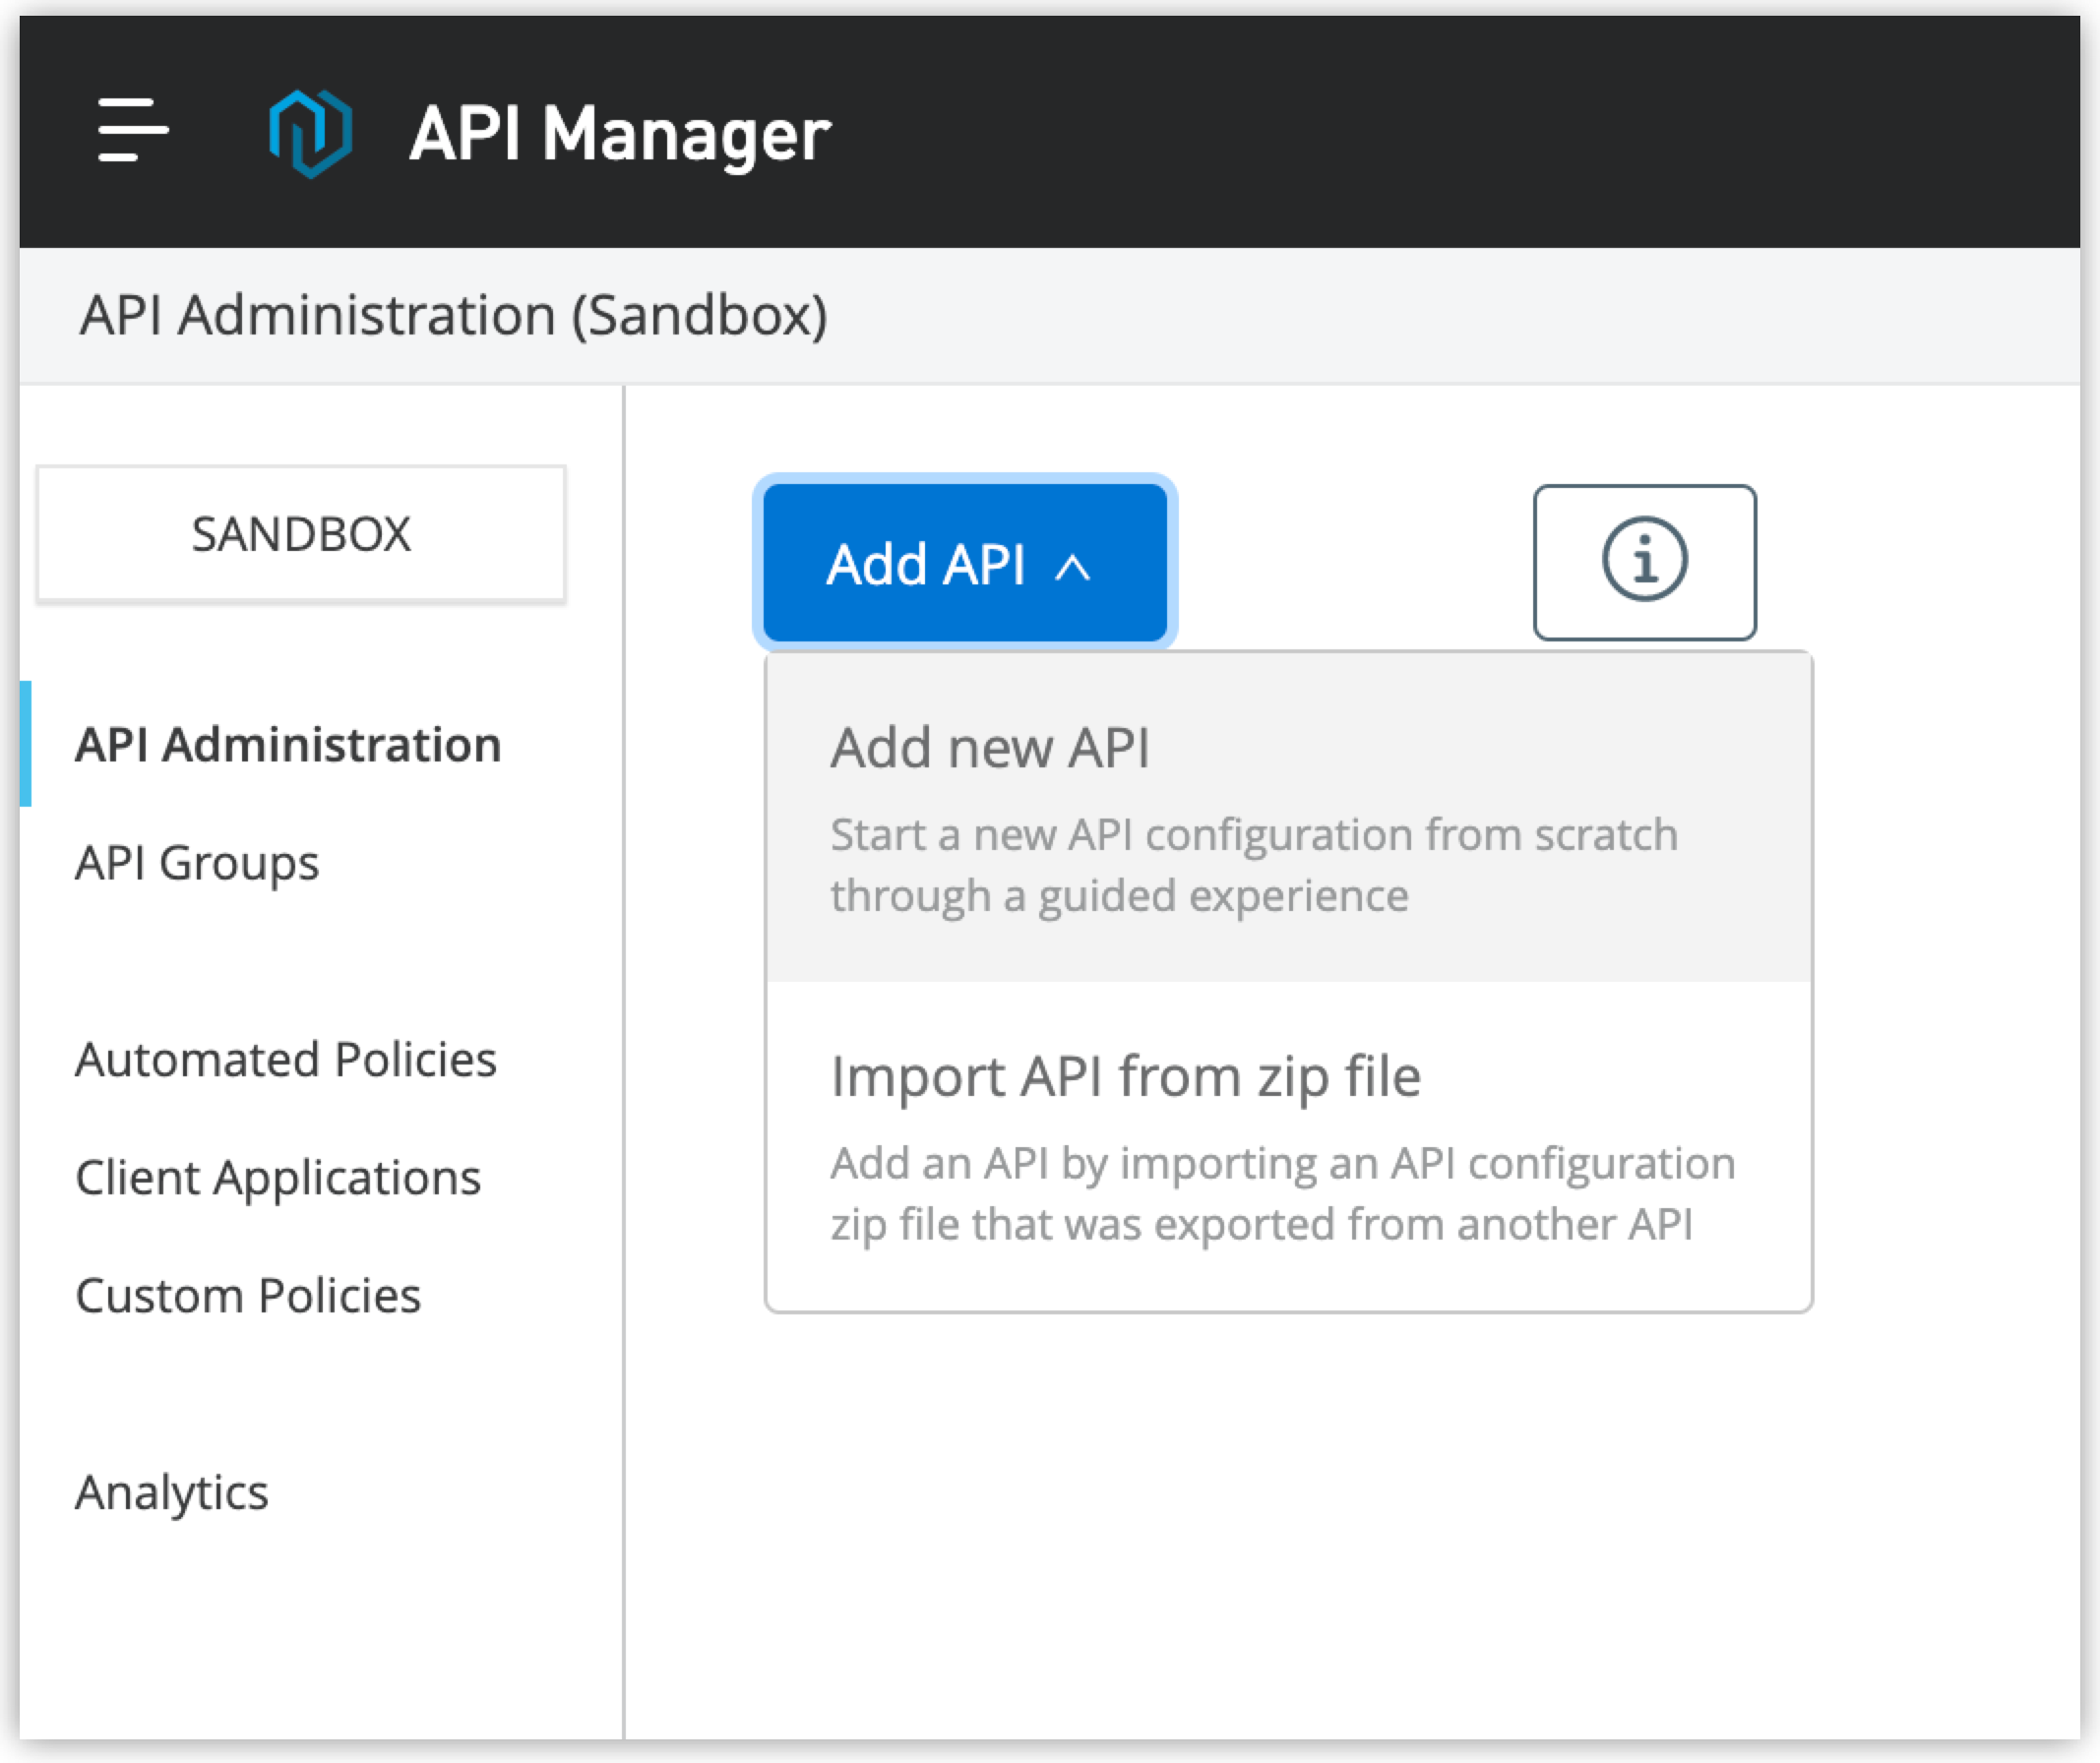 Add new API page with Add new API selected